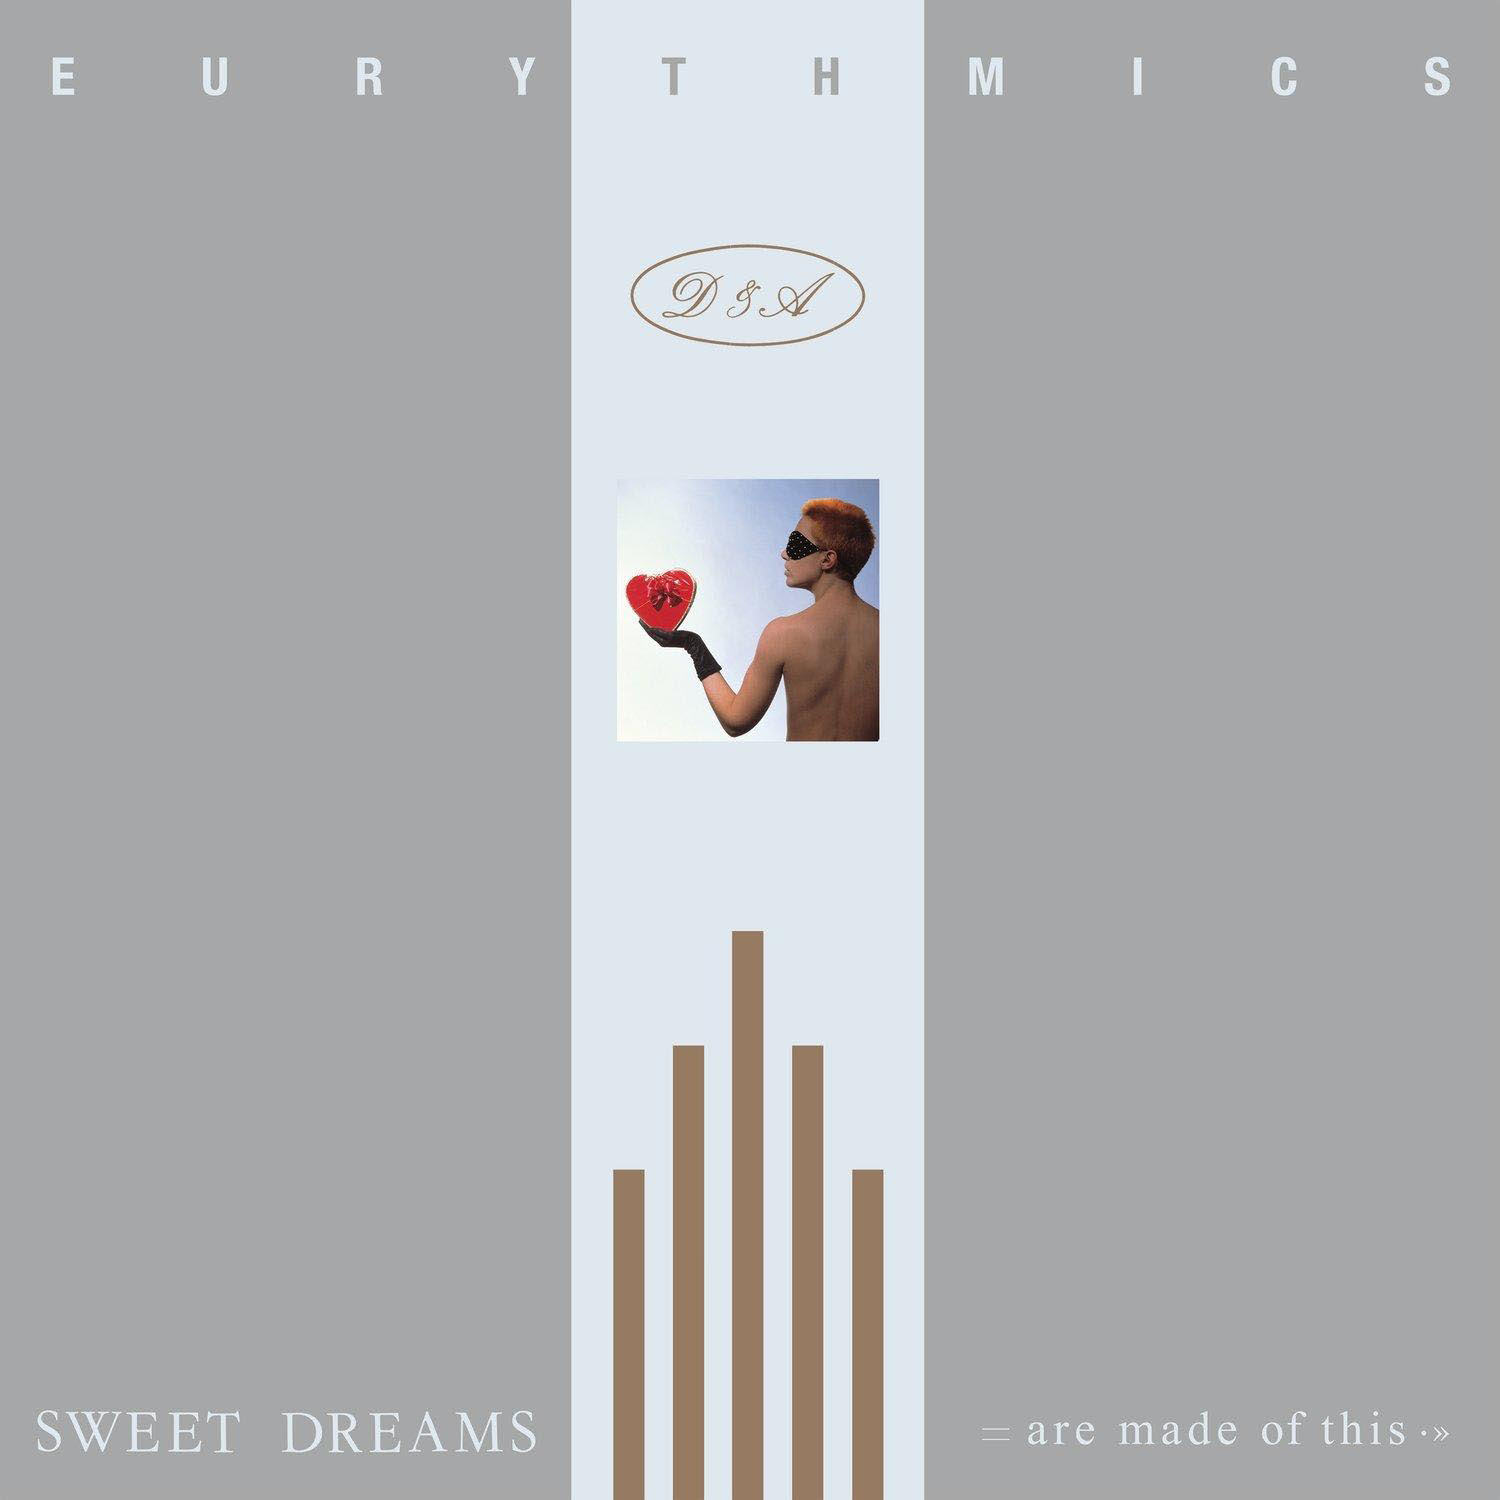 Eurythmics - Sweet Dreams Made of (Are This) (Vinyl) 